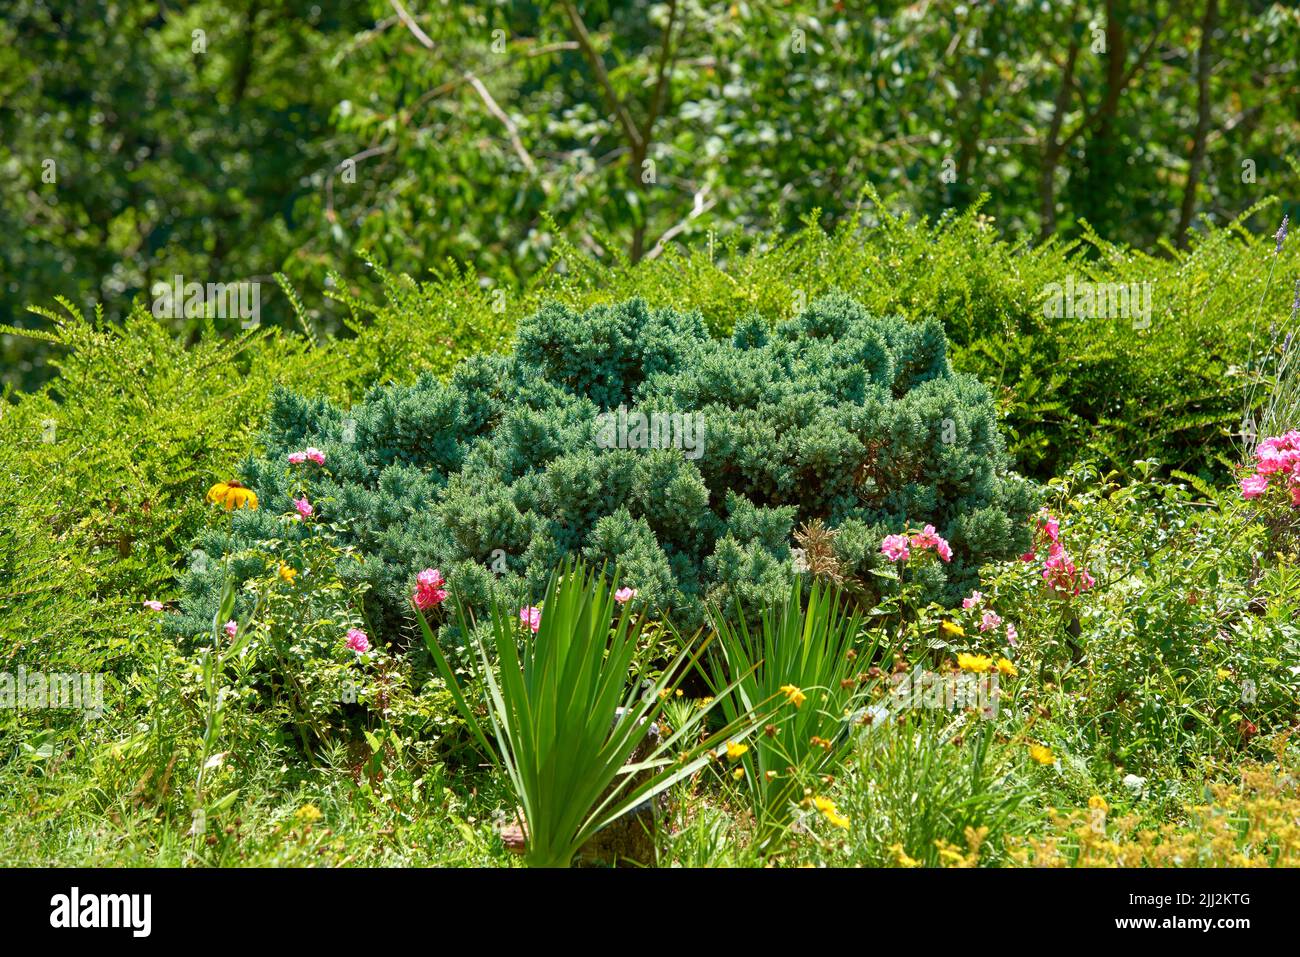 Beautiful green landscape with shrubs, trees, and flowers in nature. Closeup of grass and growing plants in summer with a forest background. A Stock Photo